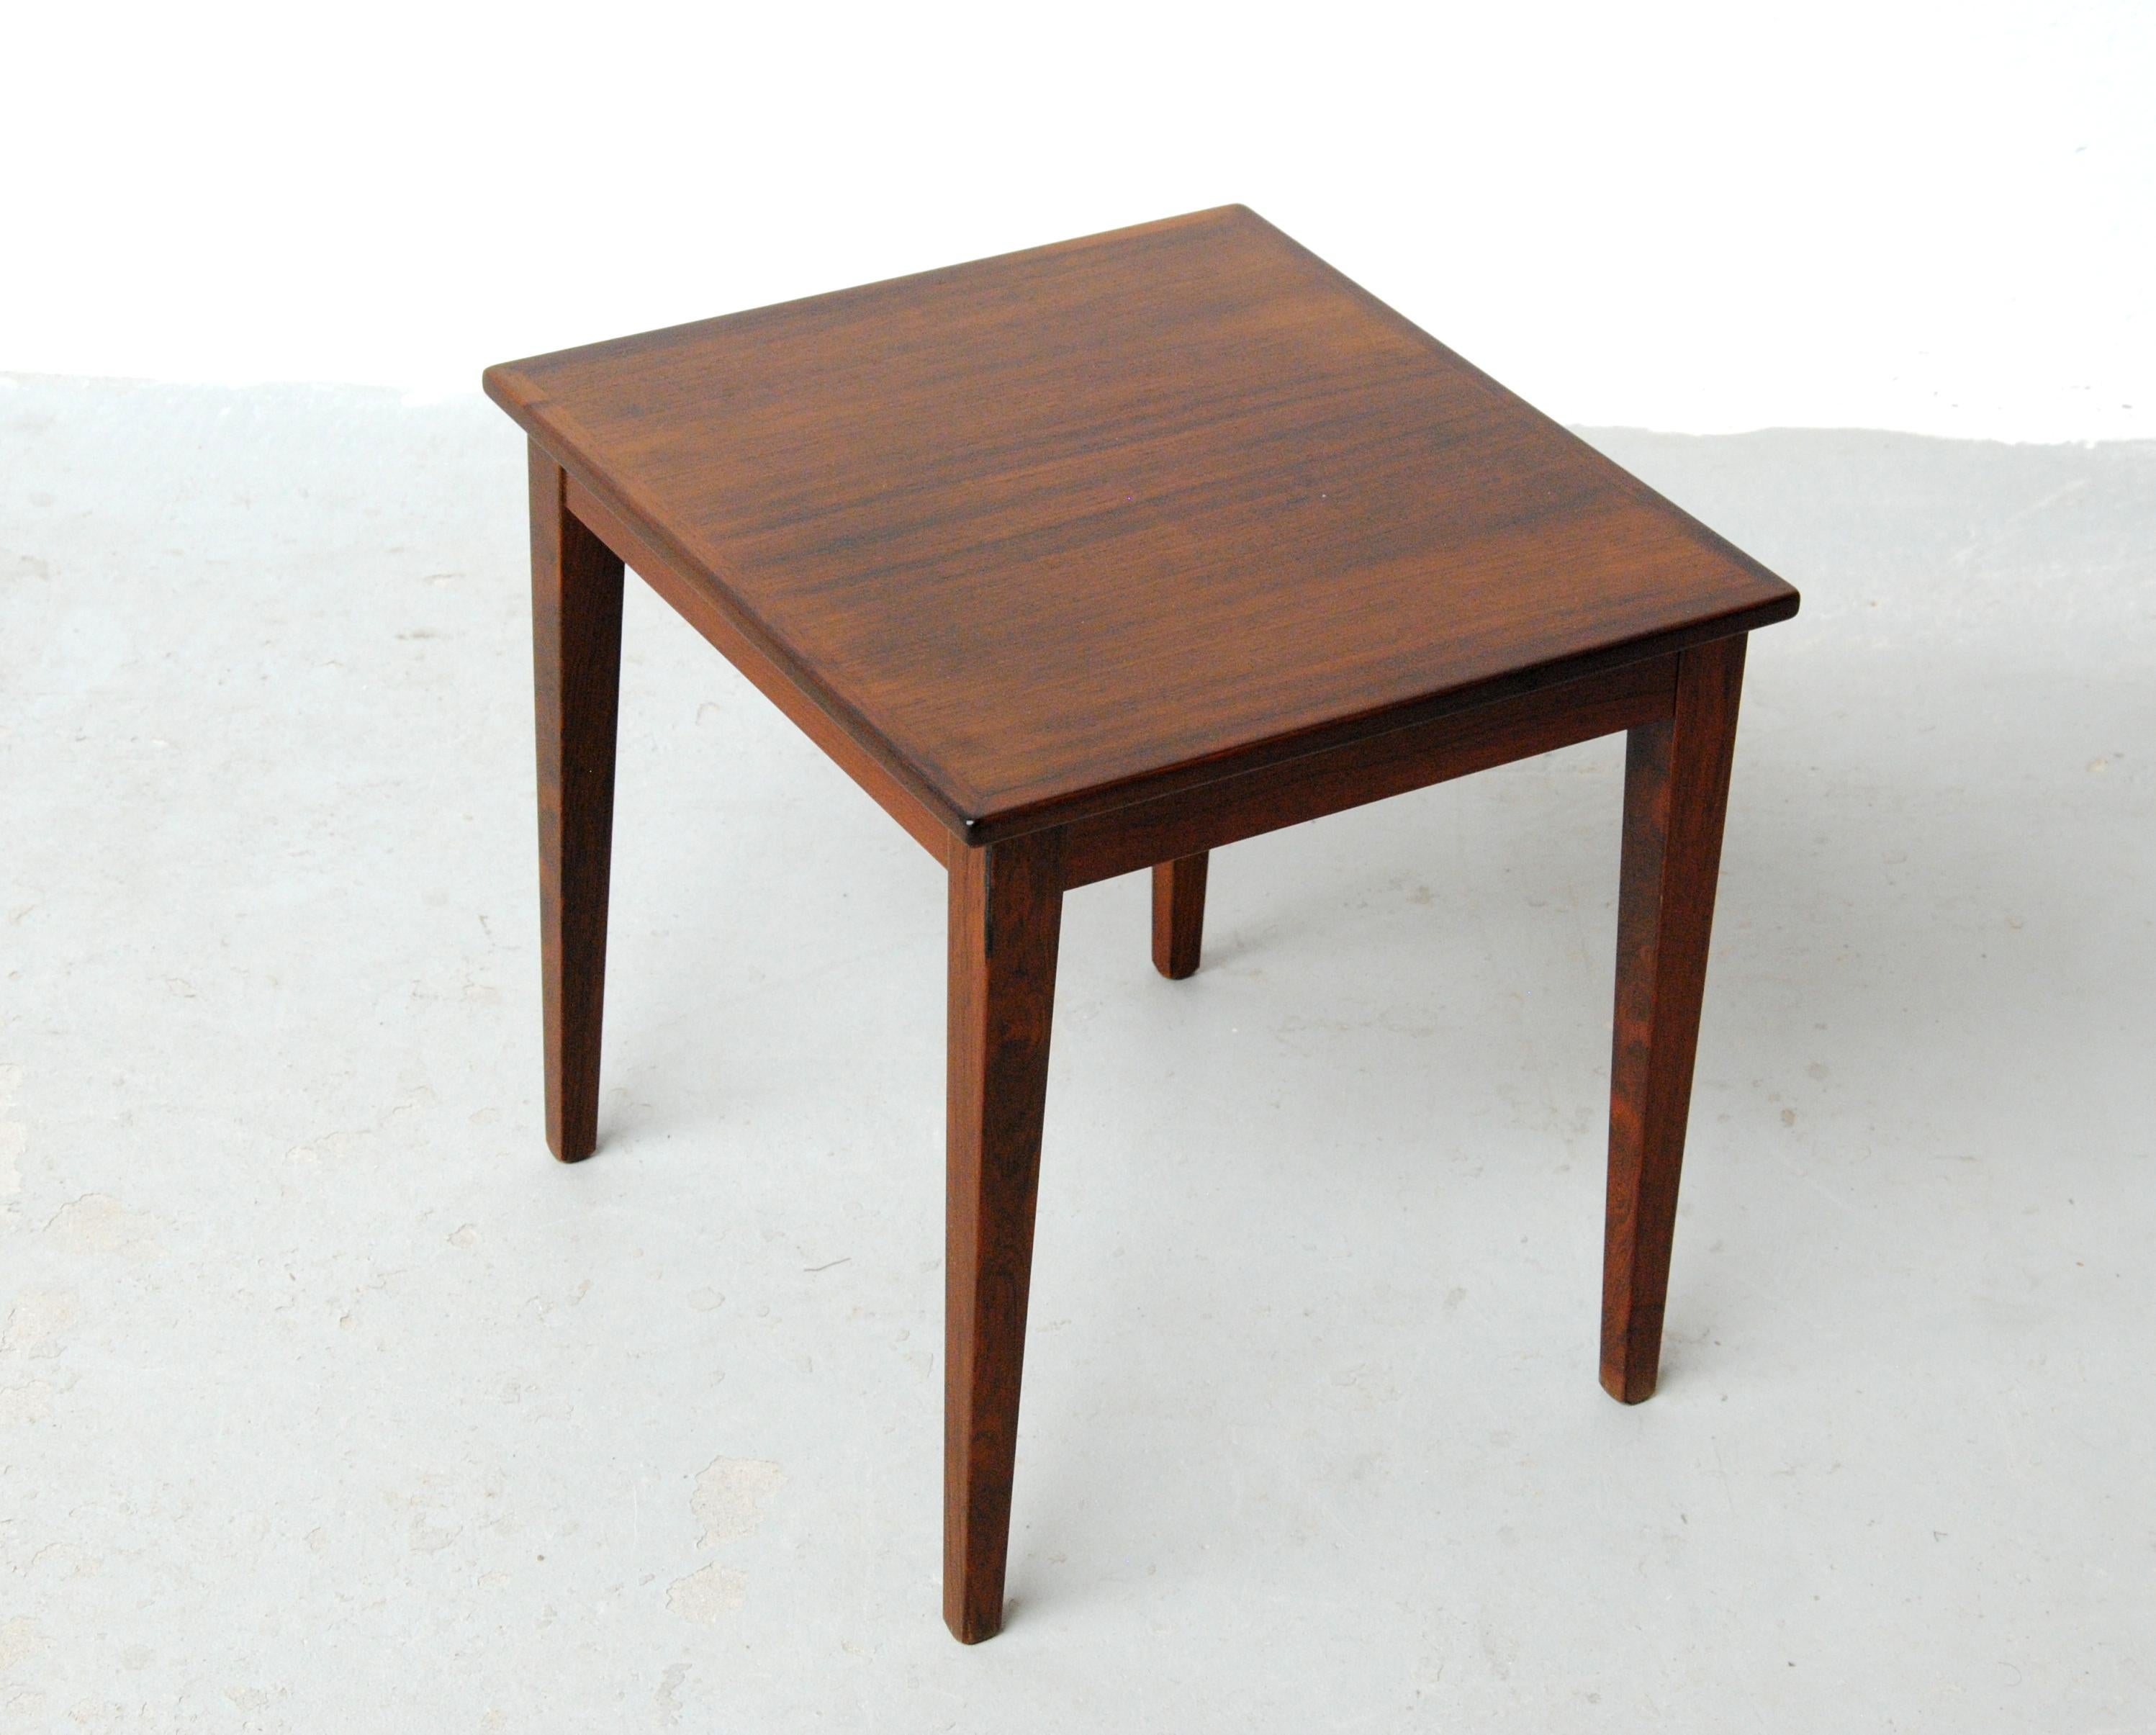 1960's Fully restored small Danish rosewood side table by Kvalitet Form Funktion.

Small Danish side table that easily fit in where needed and when neede in your home, and is easy to disassemble and put into storage untill you need it